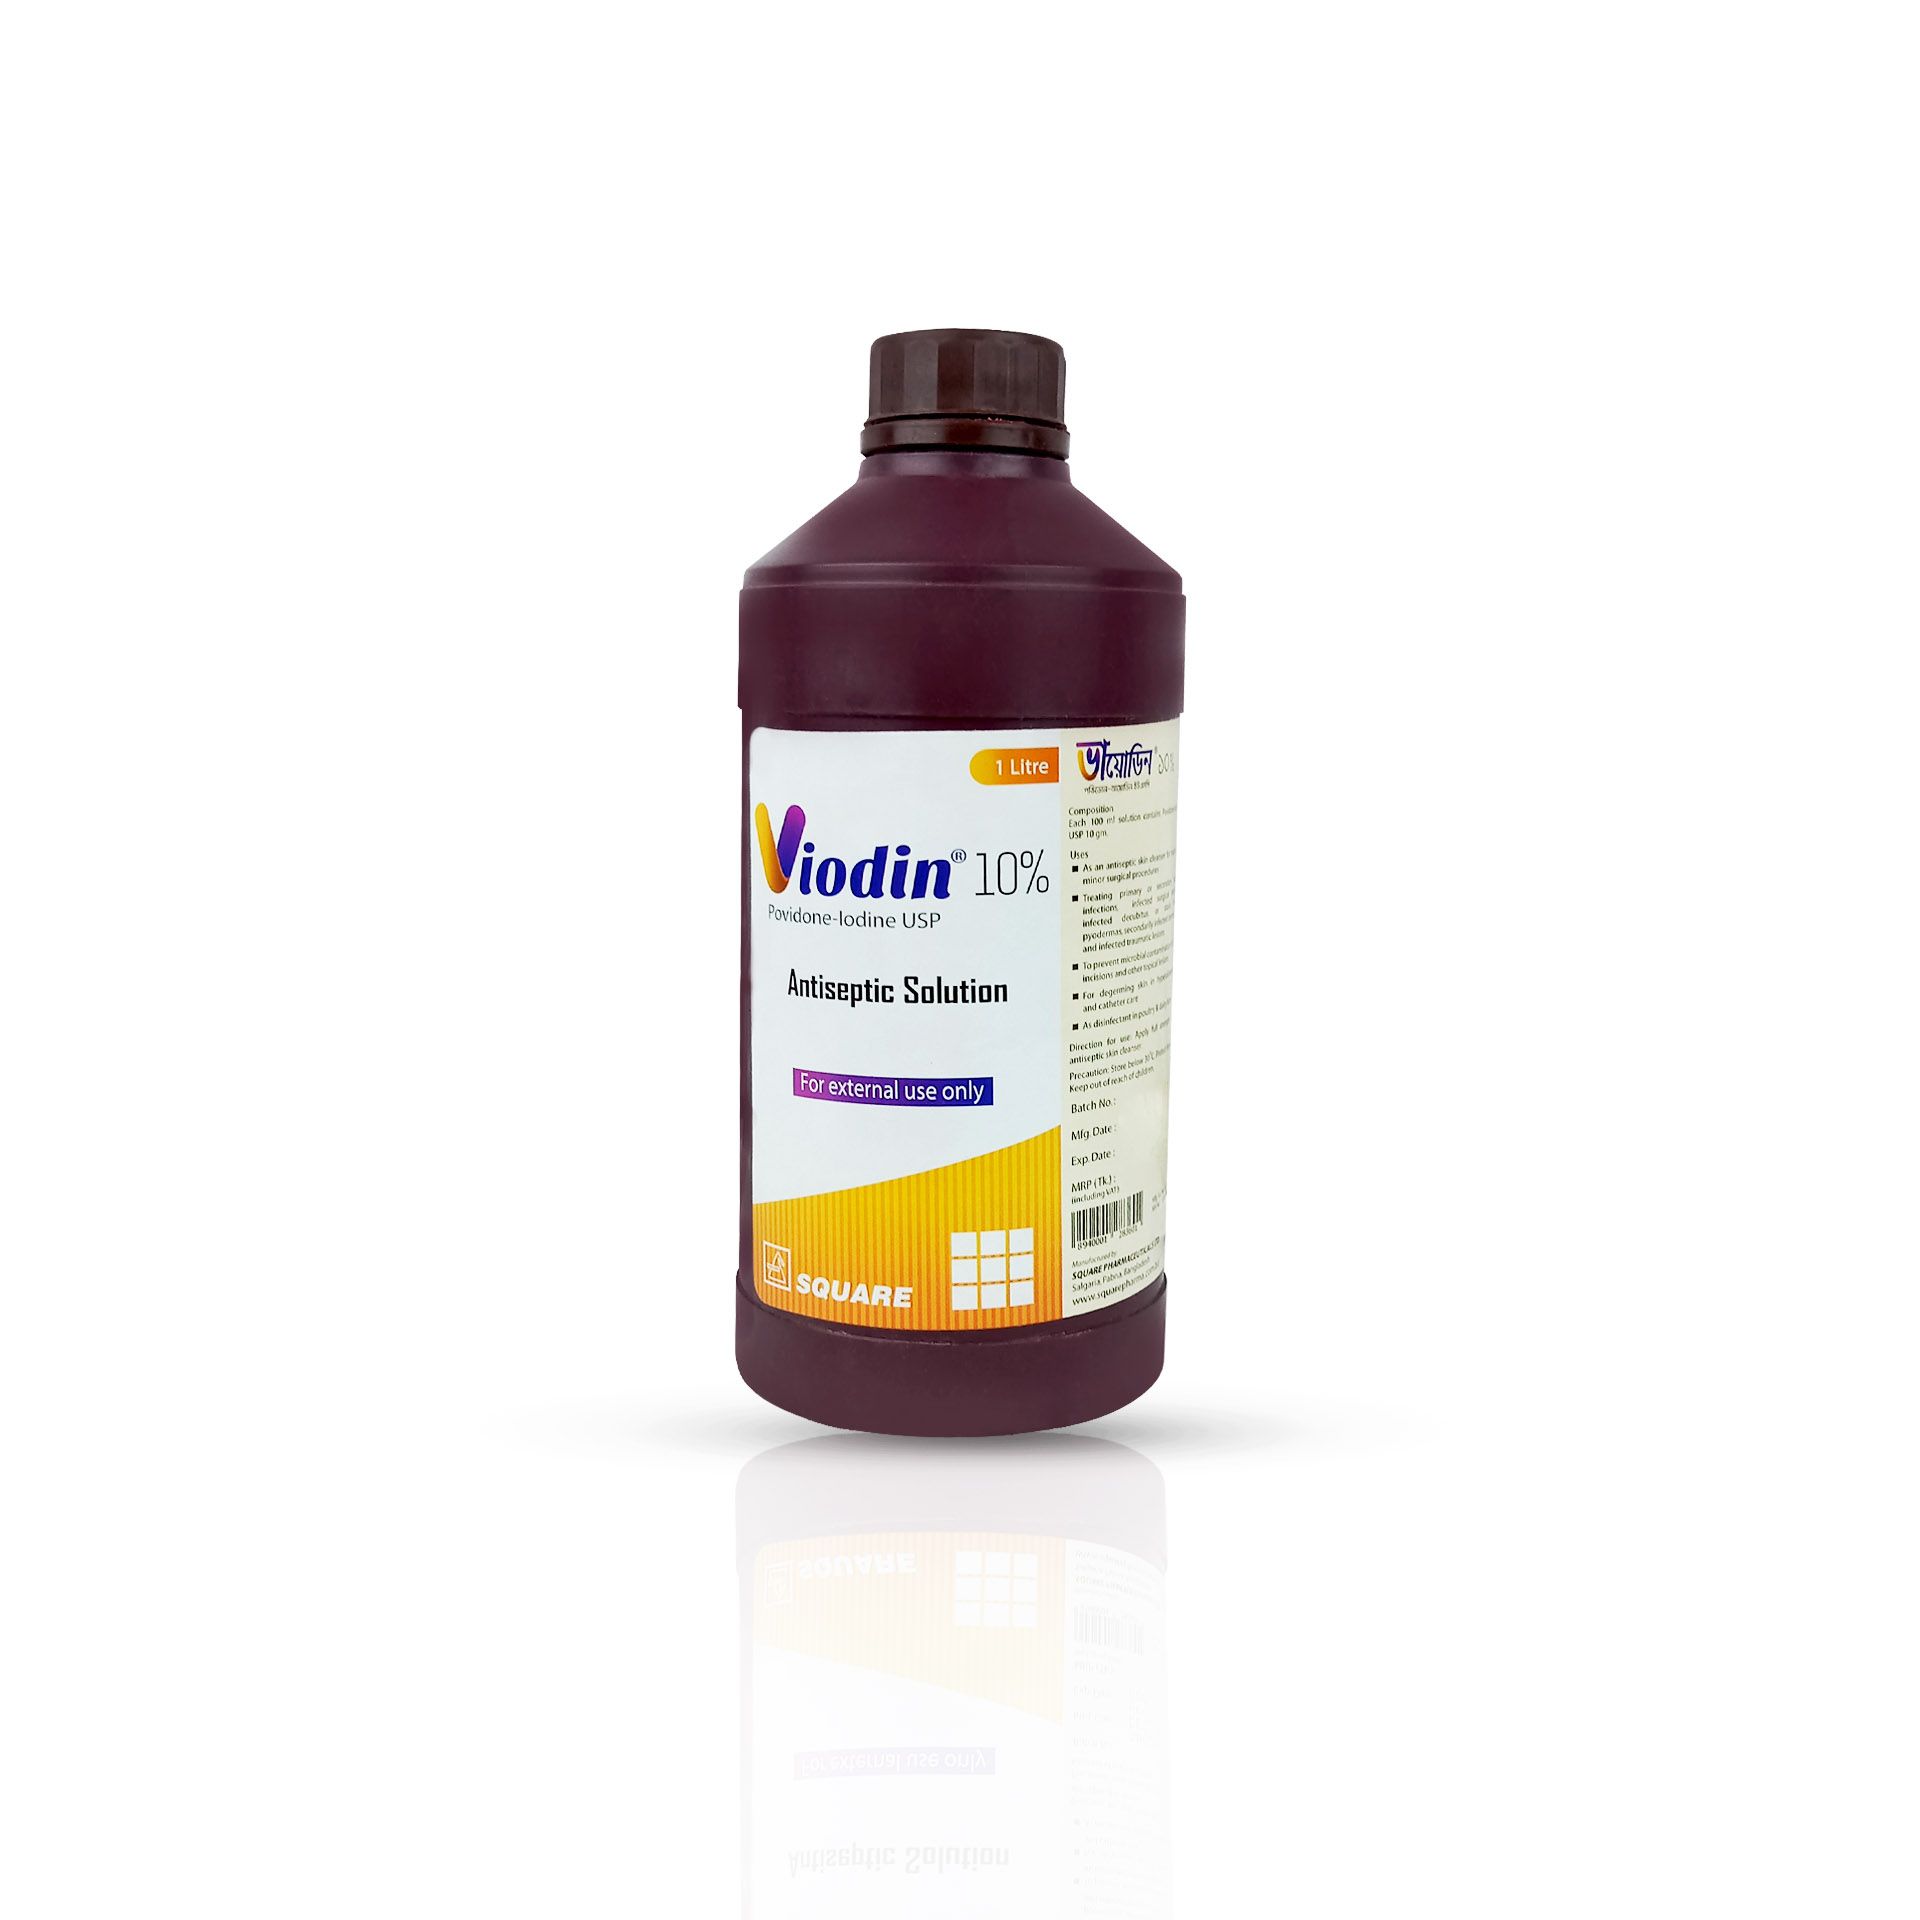 Viodin 10% 1000ml 10% Topical Solution